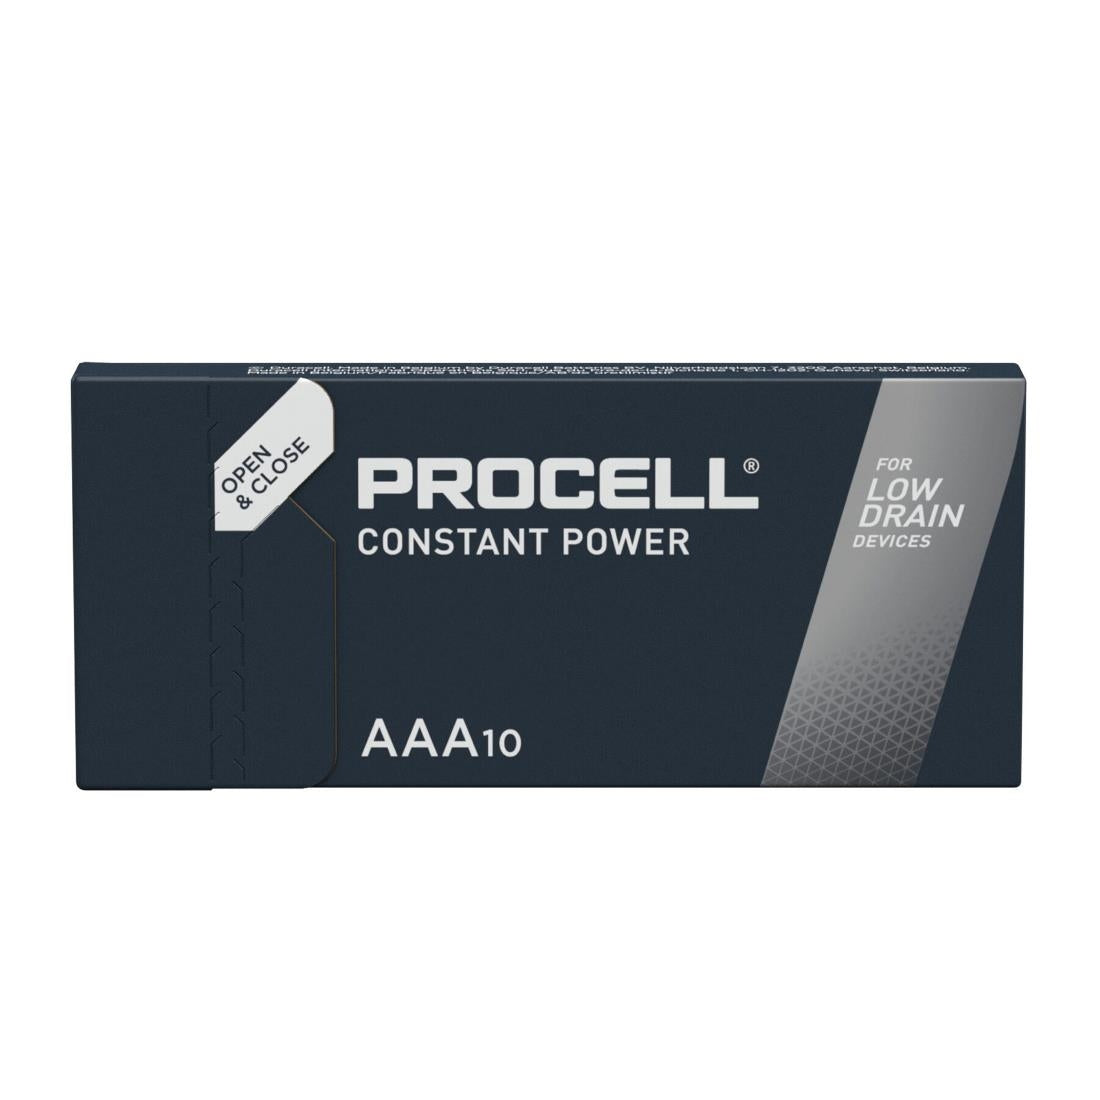 CU751 Duracell Procell Constant Power AAA 1.5V Battery (Pack of 10) JD Catering Equipment Solutions Ltd